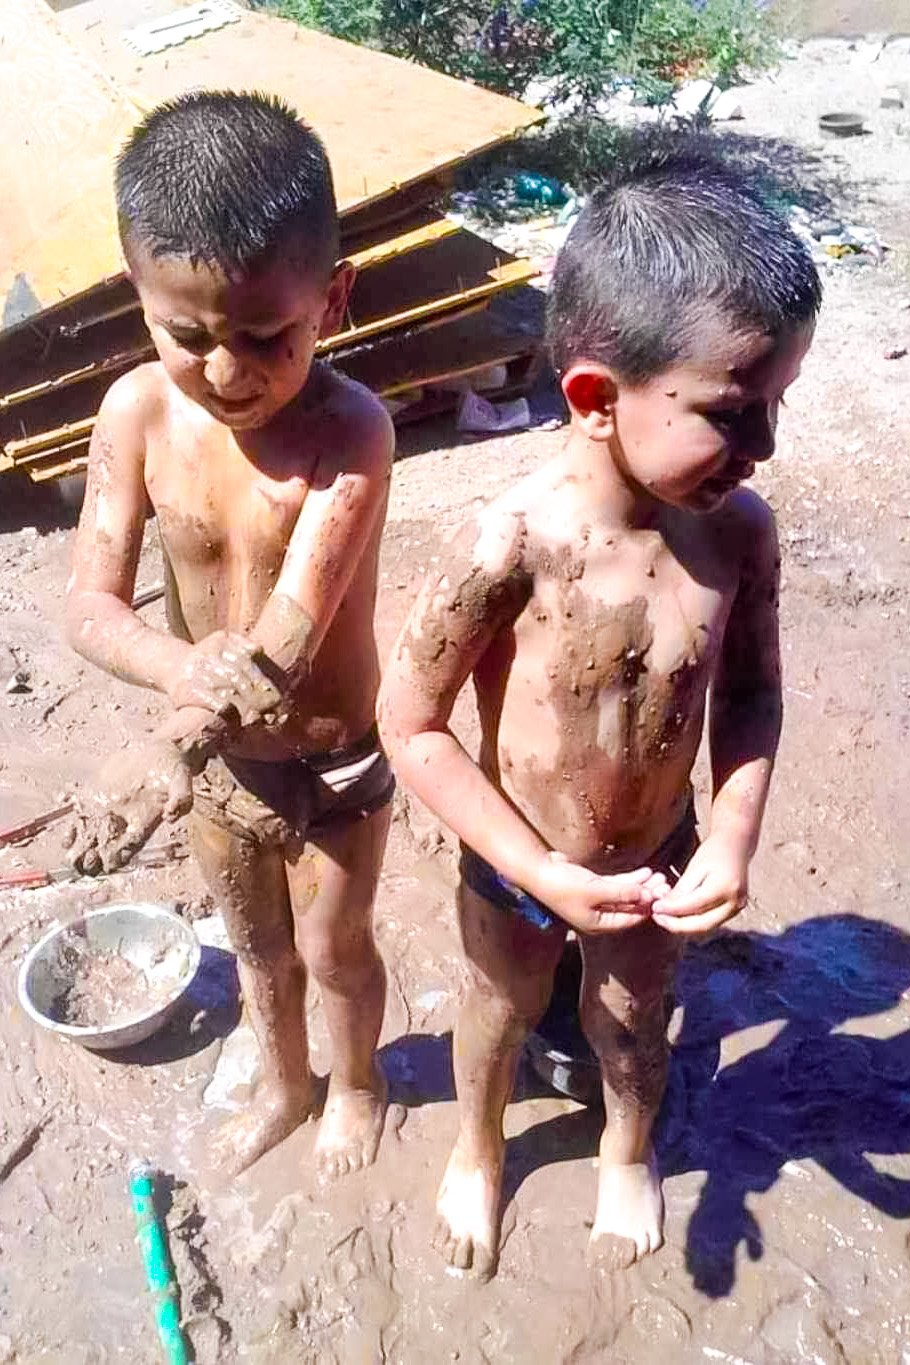 Felipe and his brother playing in mud.jpg